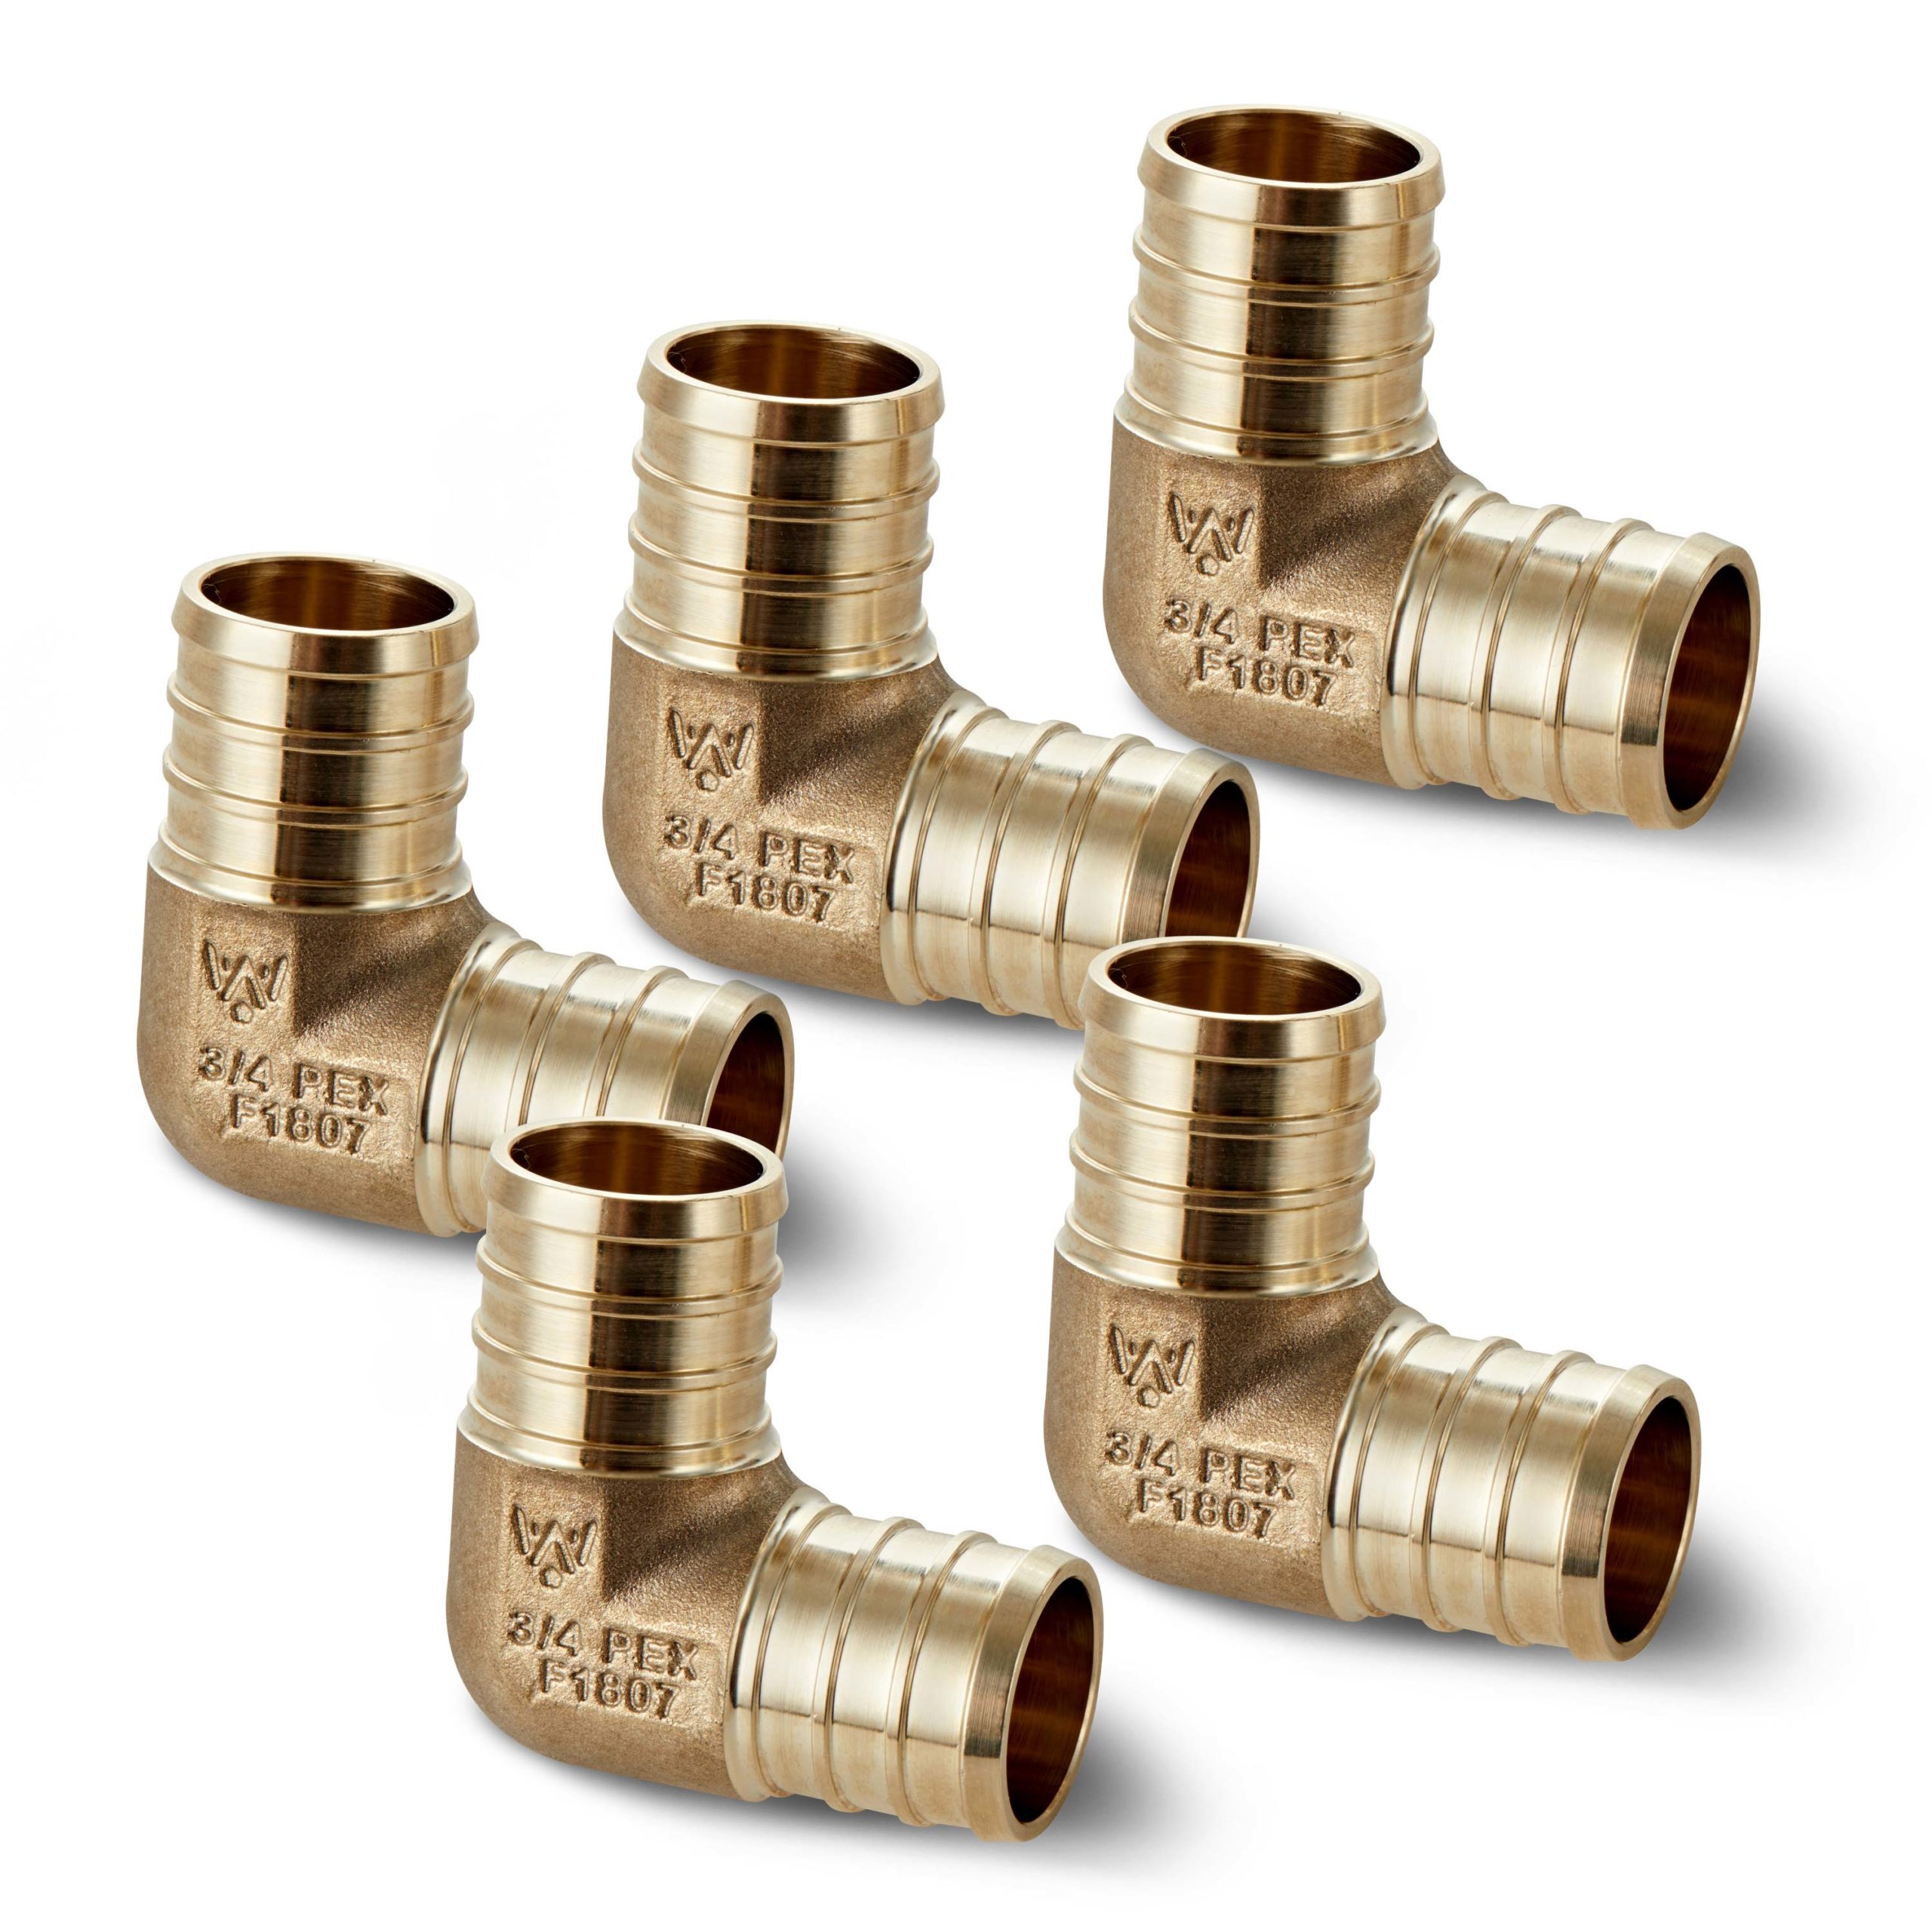 25 3/4" PEX Elbow Brass Crimping Fittings LEAD FREE